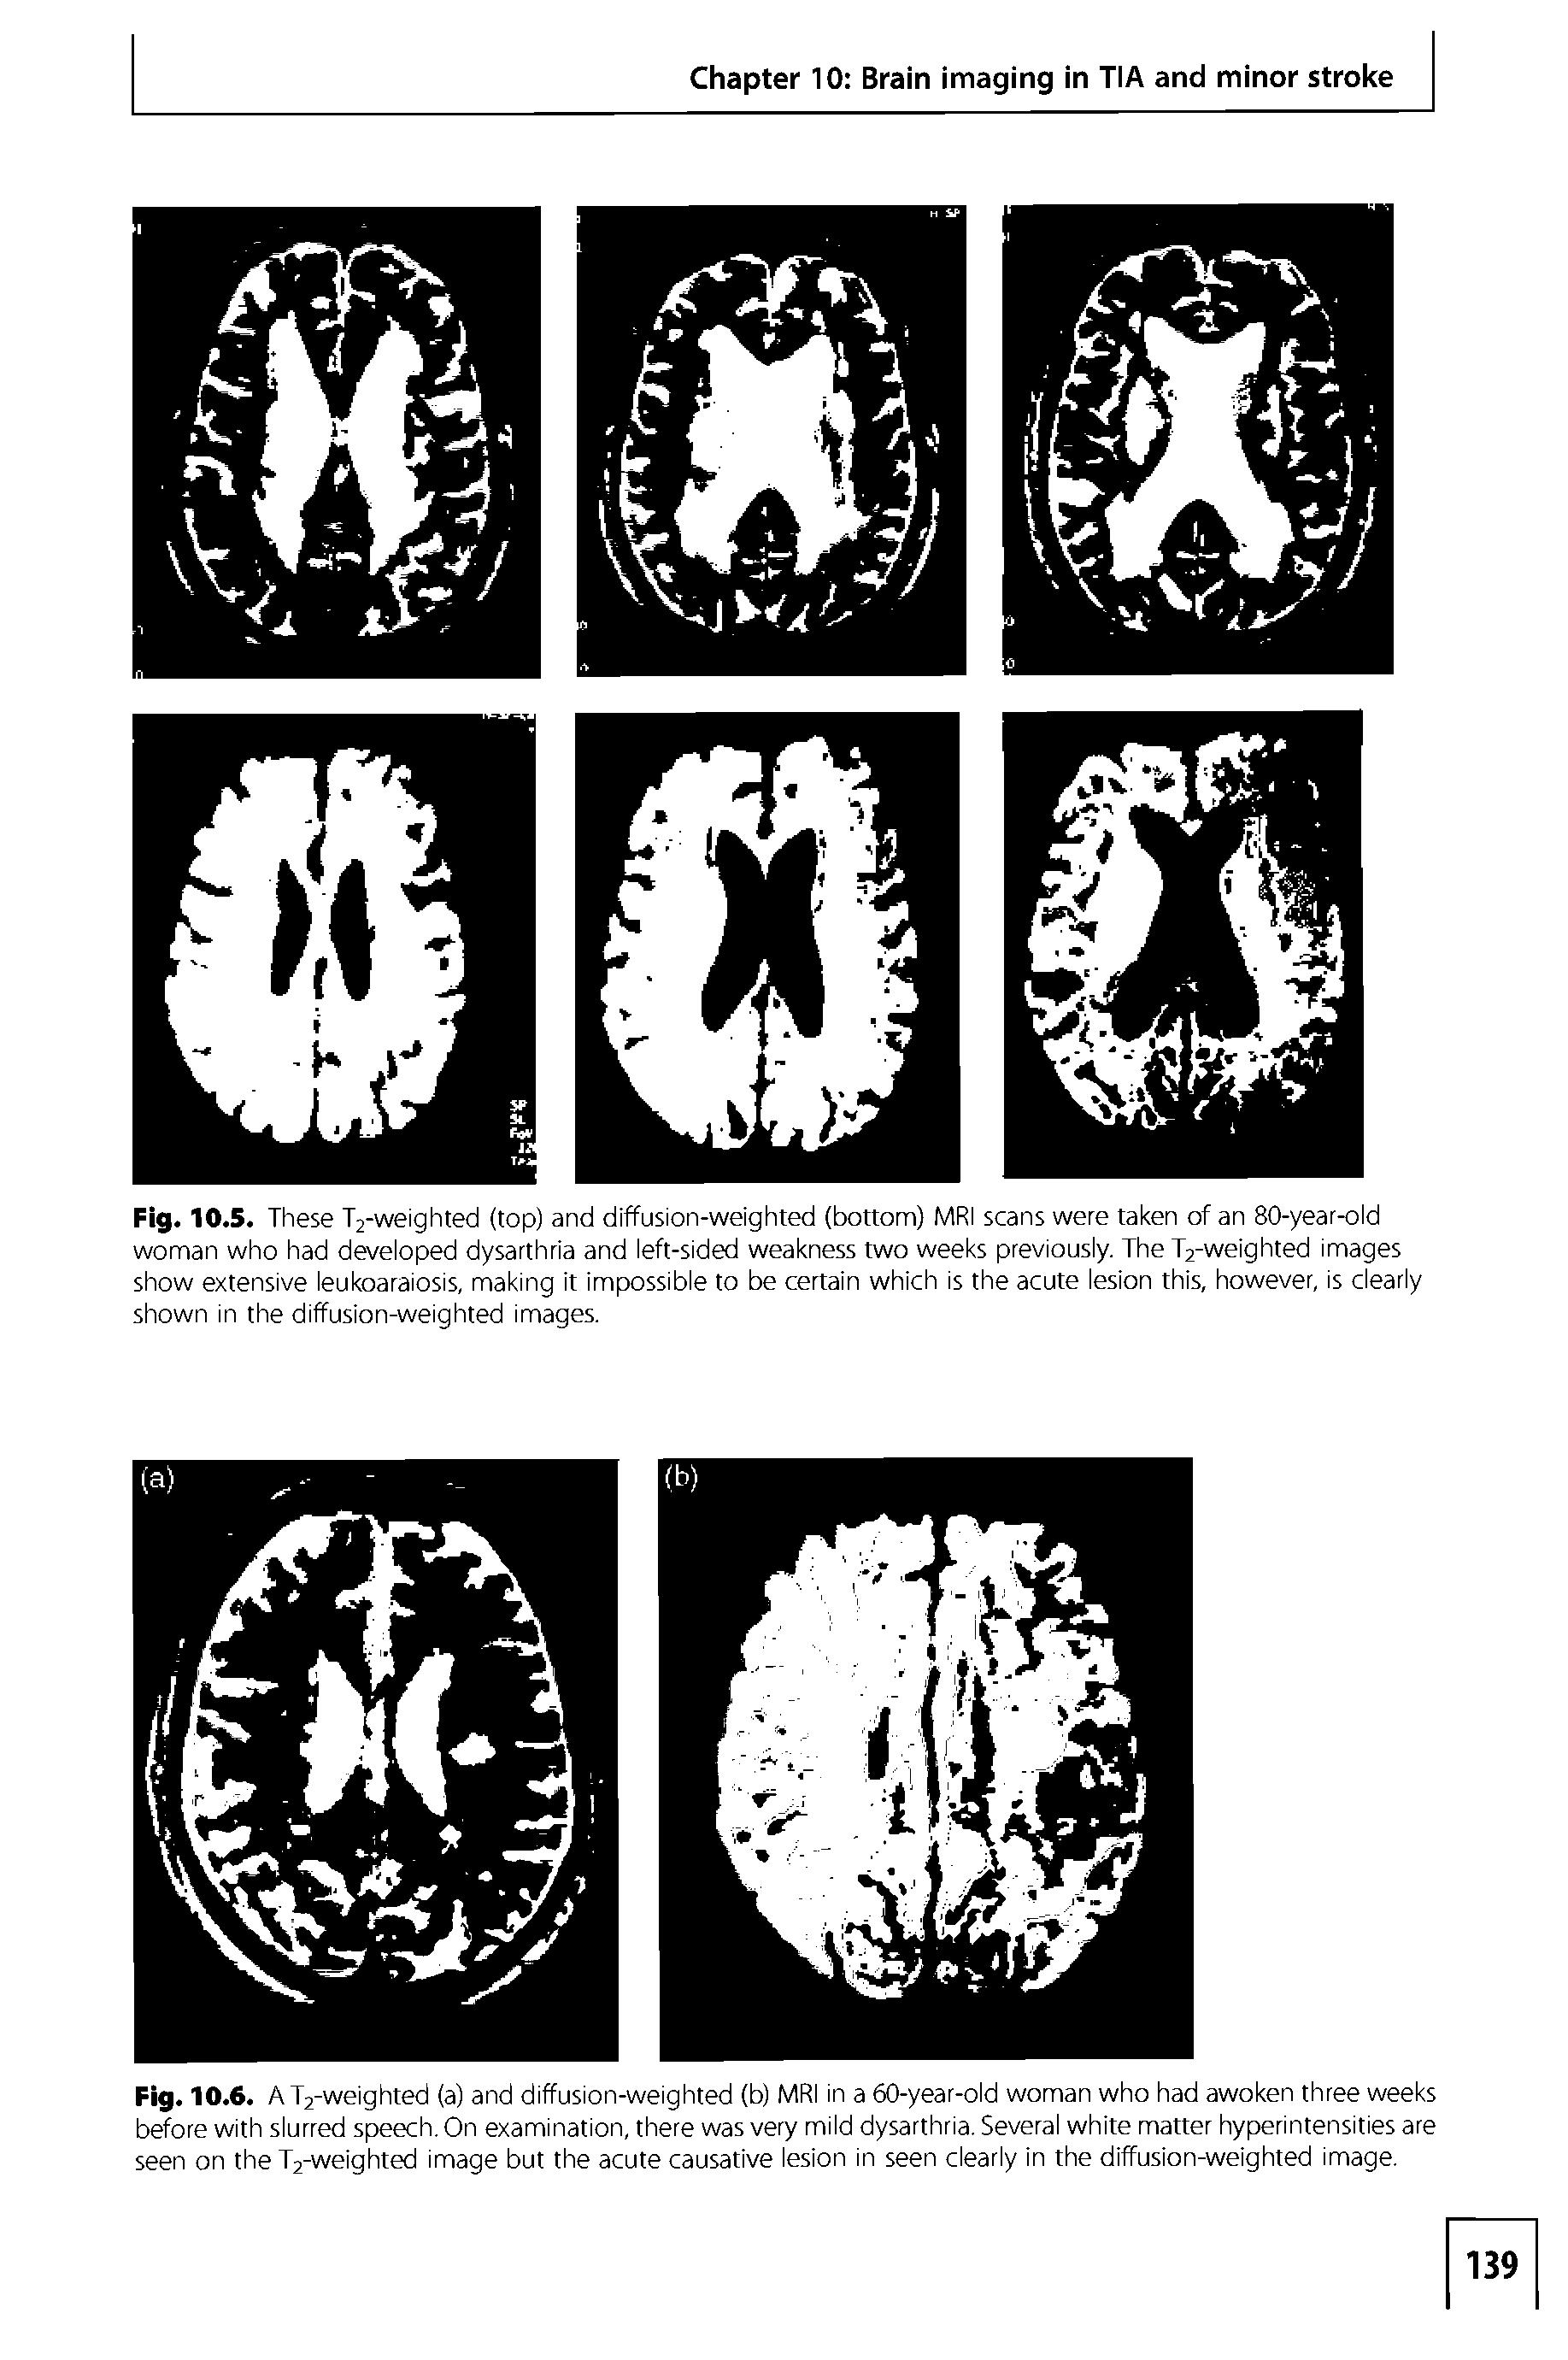 Fig. 10.6. AT2-weighted (a) and diffusion-weighted (b) MRI in a 60-year-old woman who had awoken three weeks before with slurred speech. On examination, there was very mild dysarthria. Several white matter hyperintensities are seen on the T2-weighted image but the acute causative lesion in seen clearly in the diffusion-weighted image.